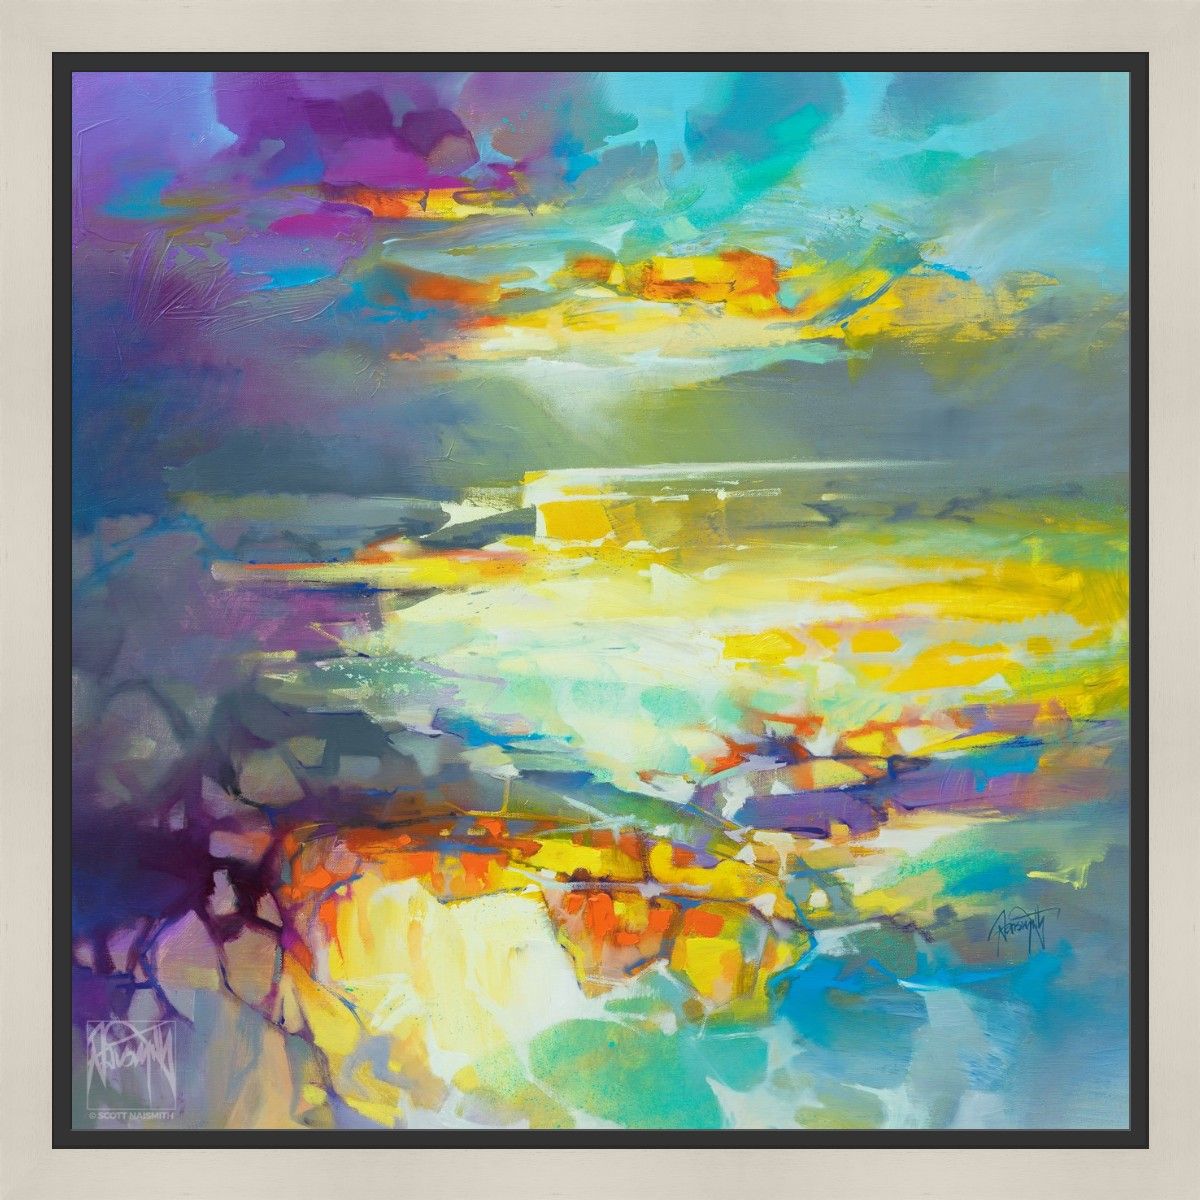 Controlling Chaos 3 by Scott Naismith